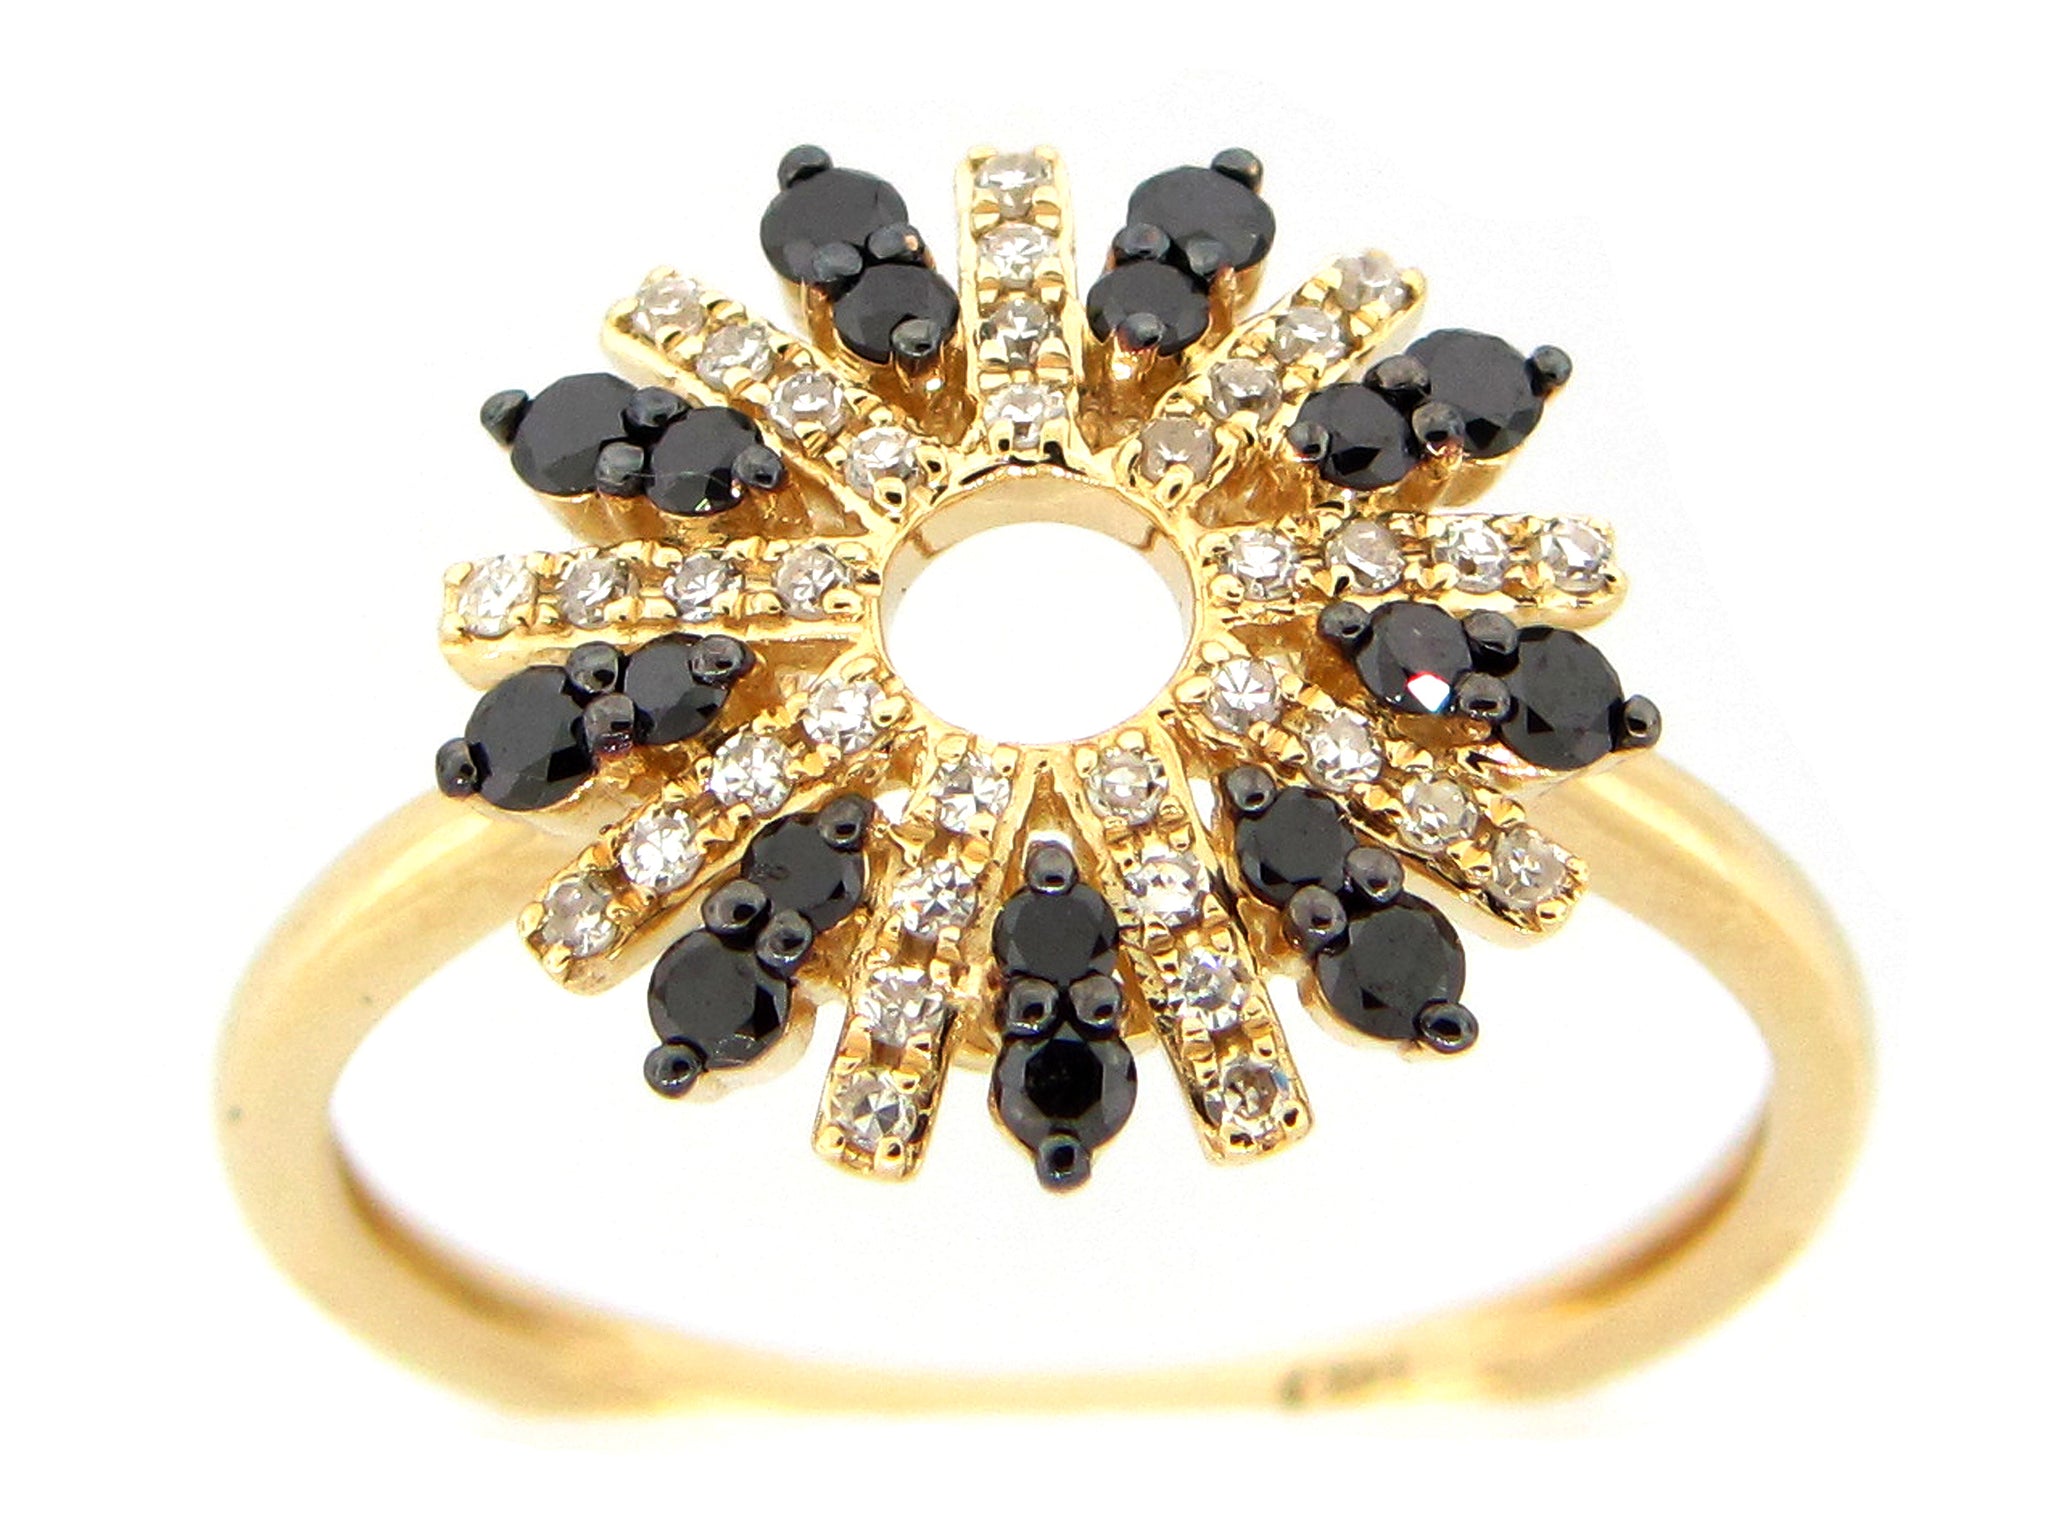 A starburst pattern ring with alternating rows of black and white diamonds.